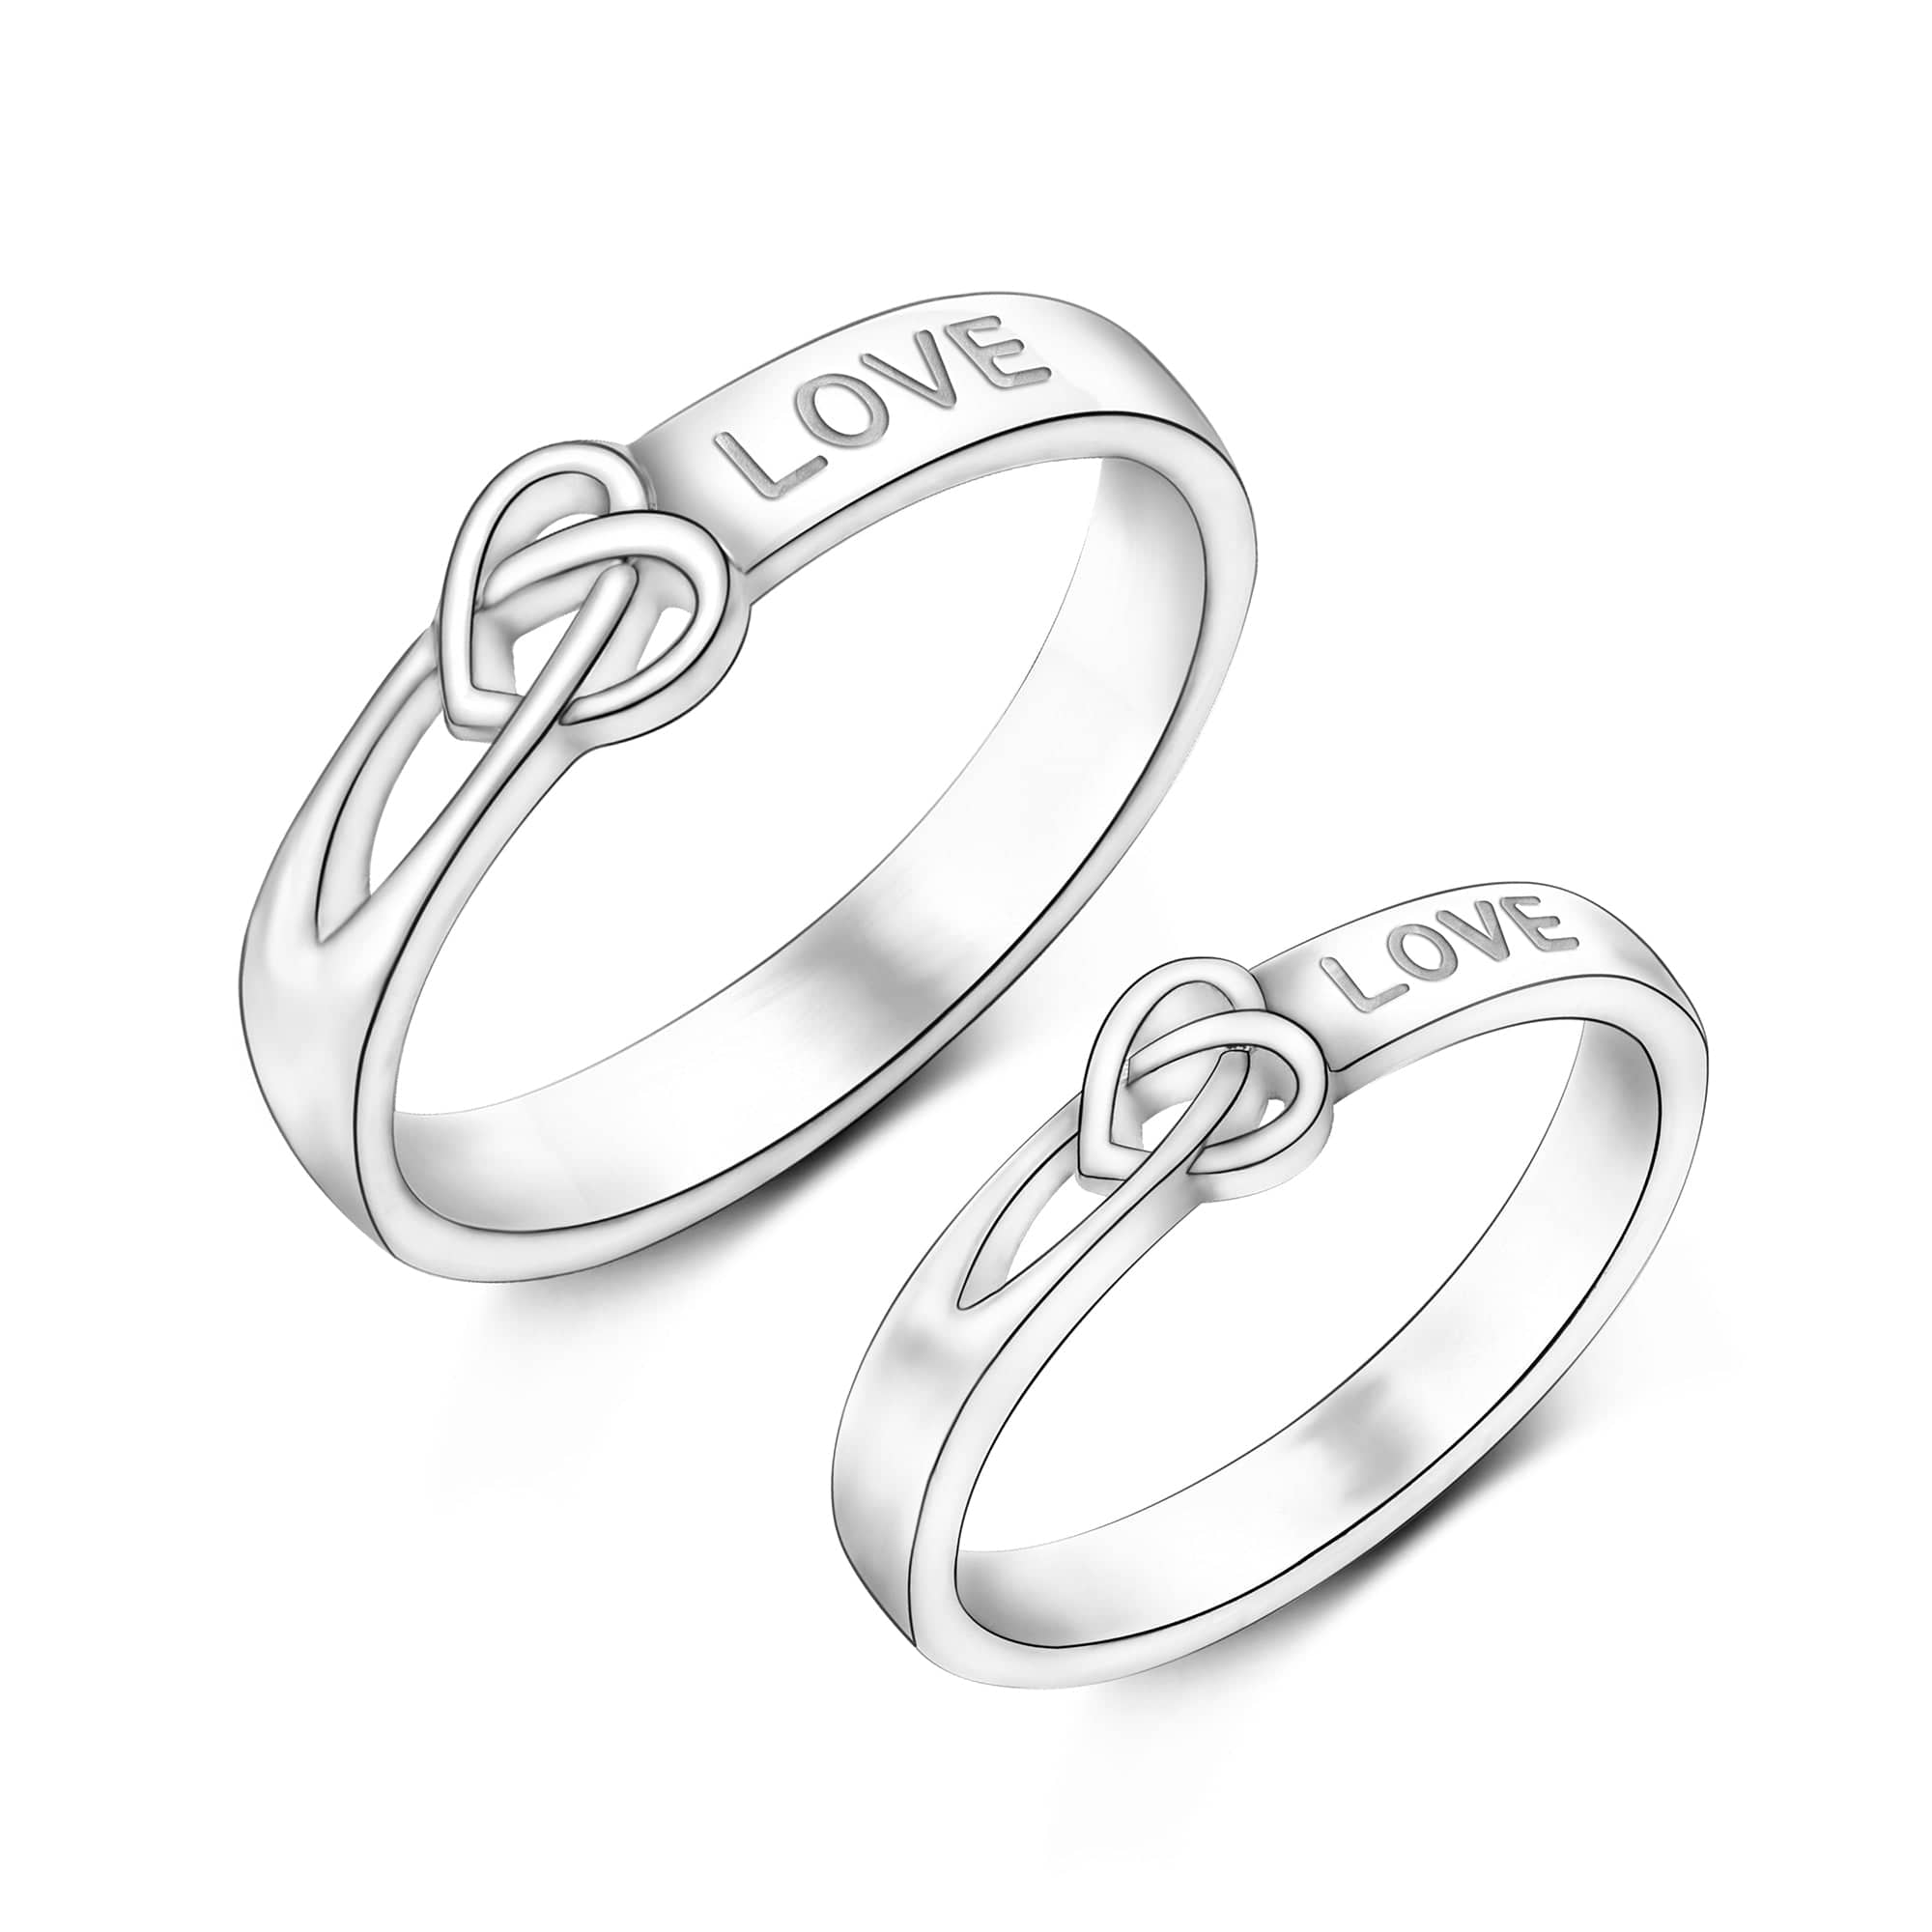 Couple Rings - Personalized Name Engraved Rings For Couples